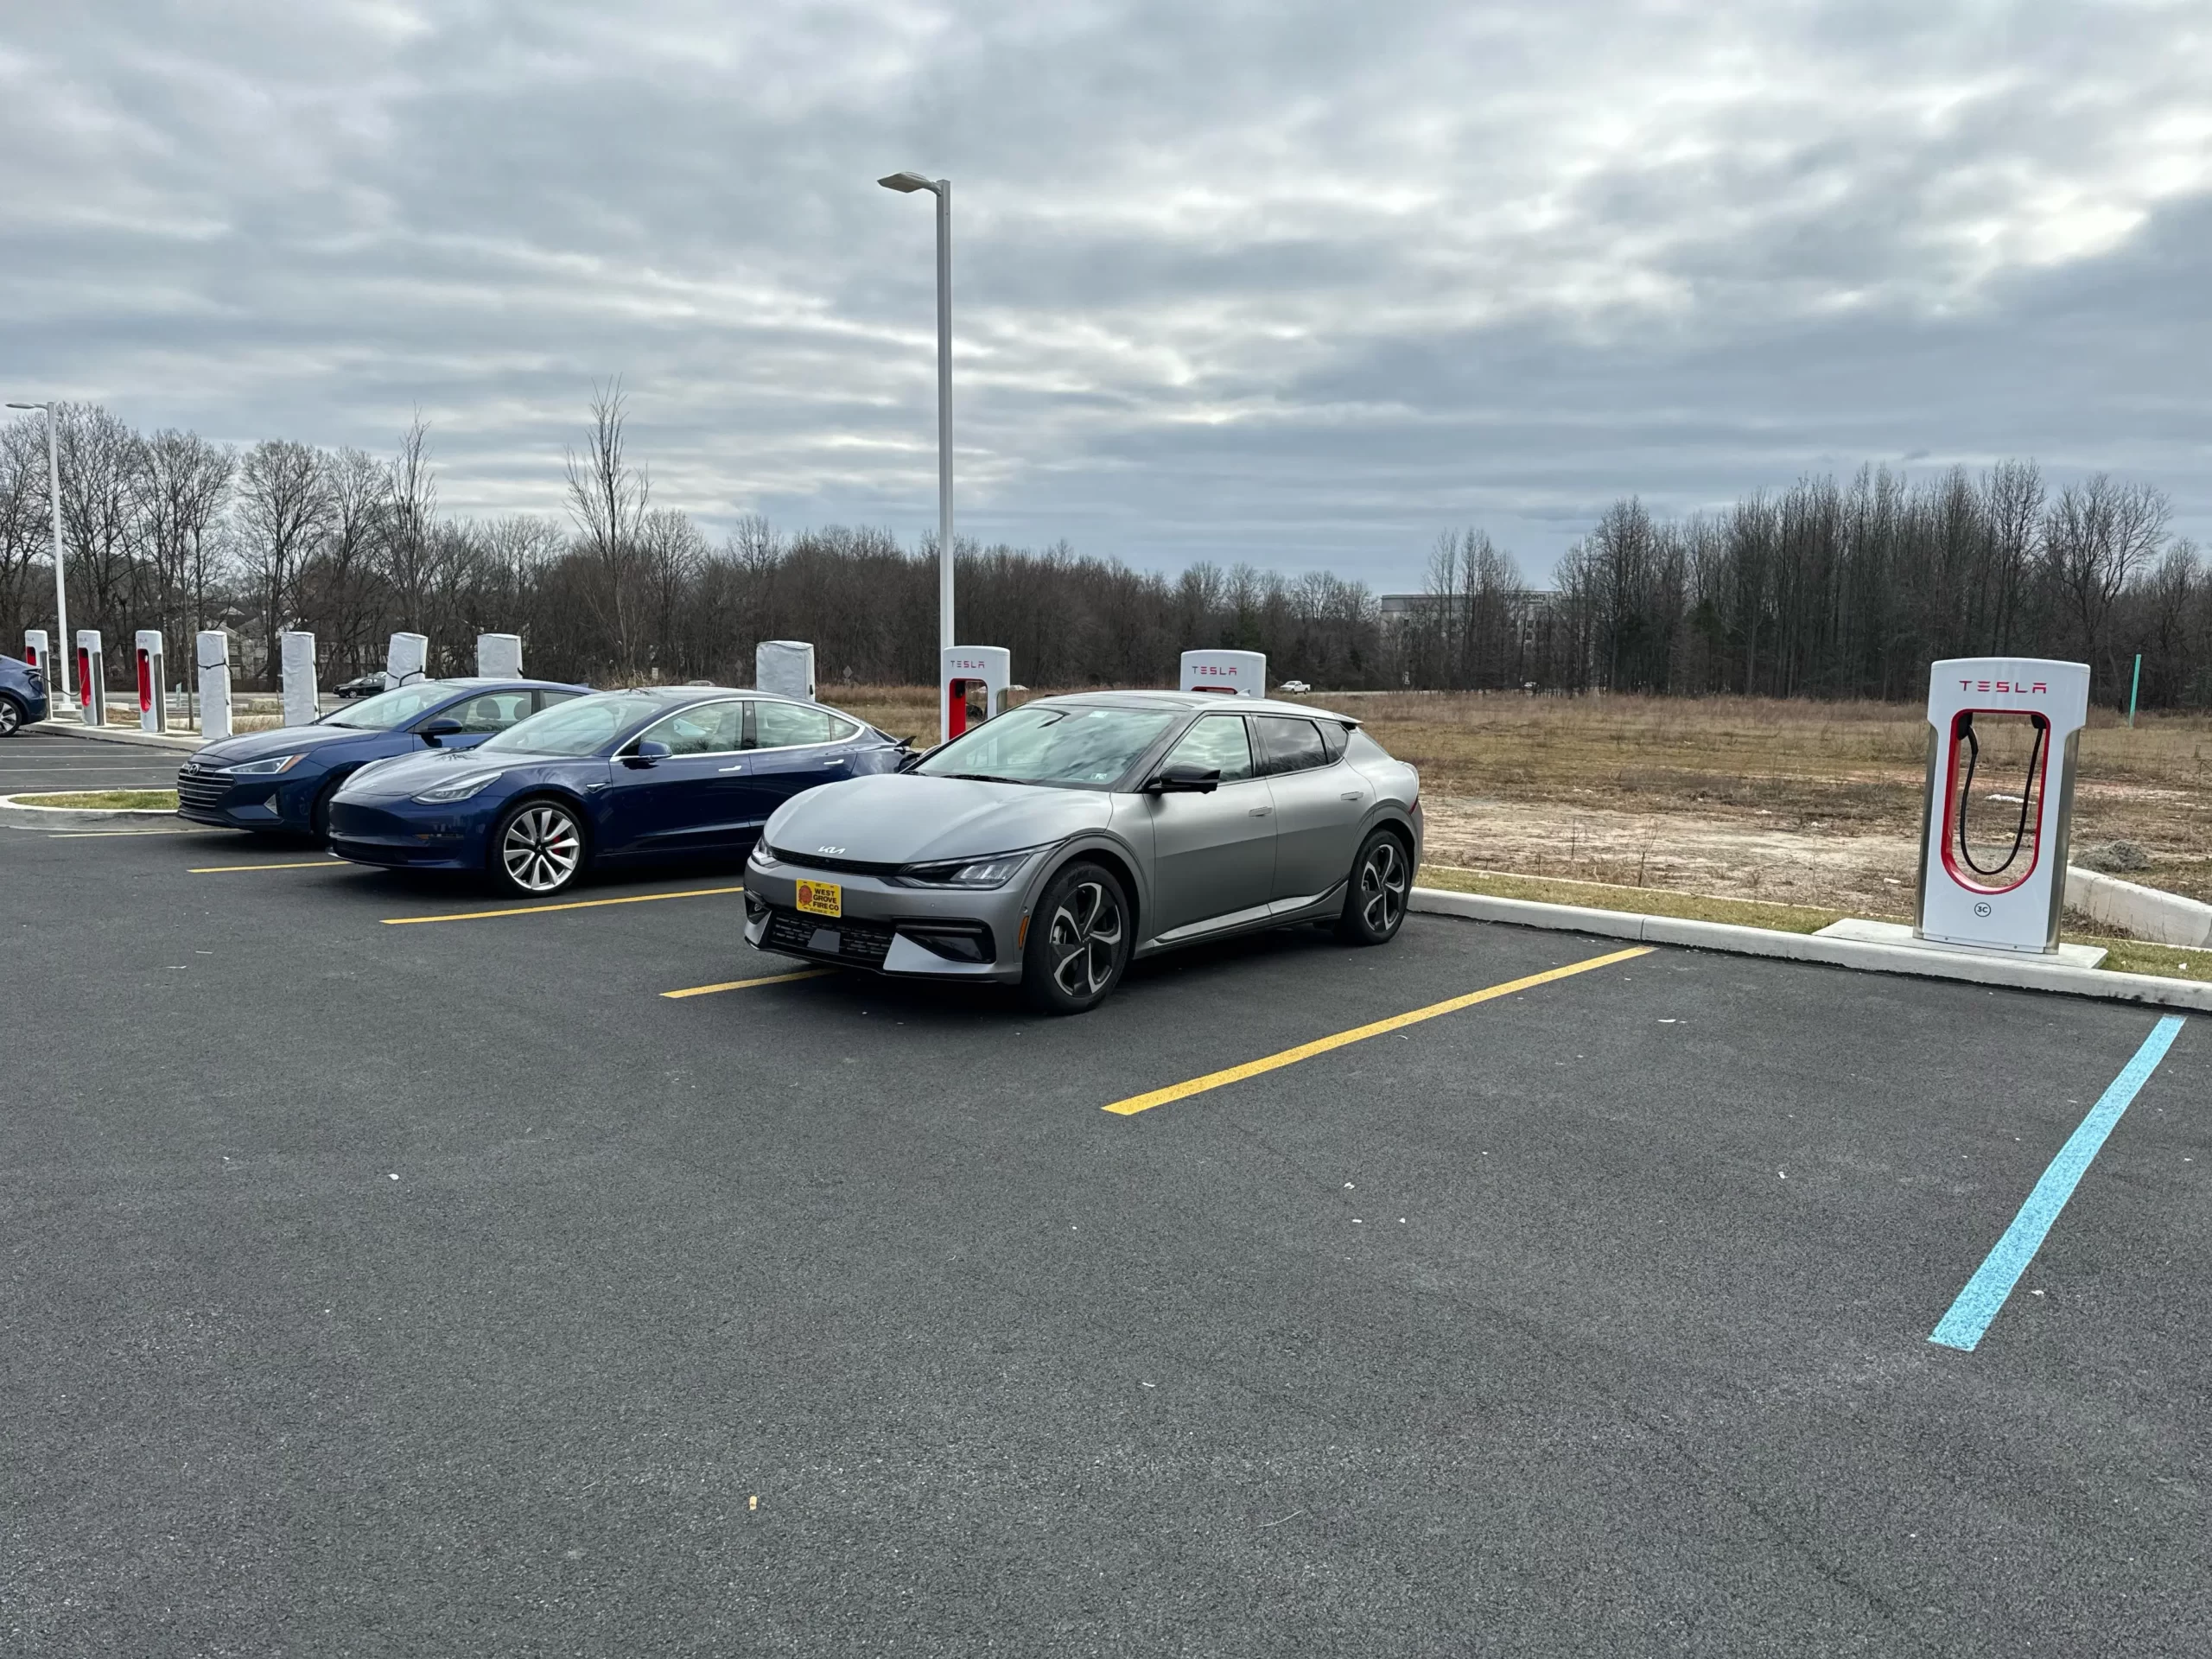 Tesla EV Charging Station scaled https://electriccarfinder.com/tesla-ev-charging-station-franchise-cost-in-usa/